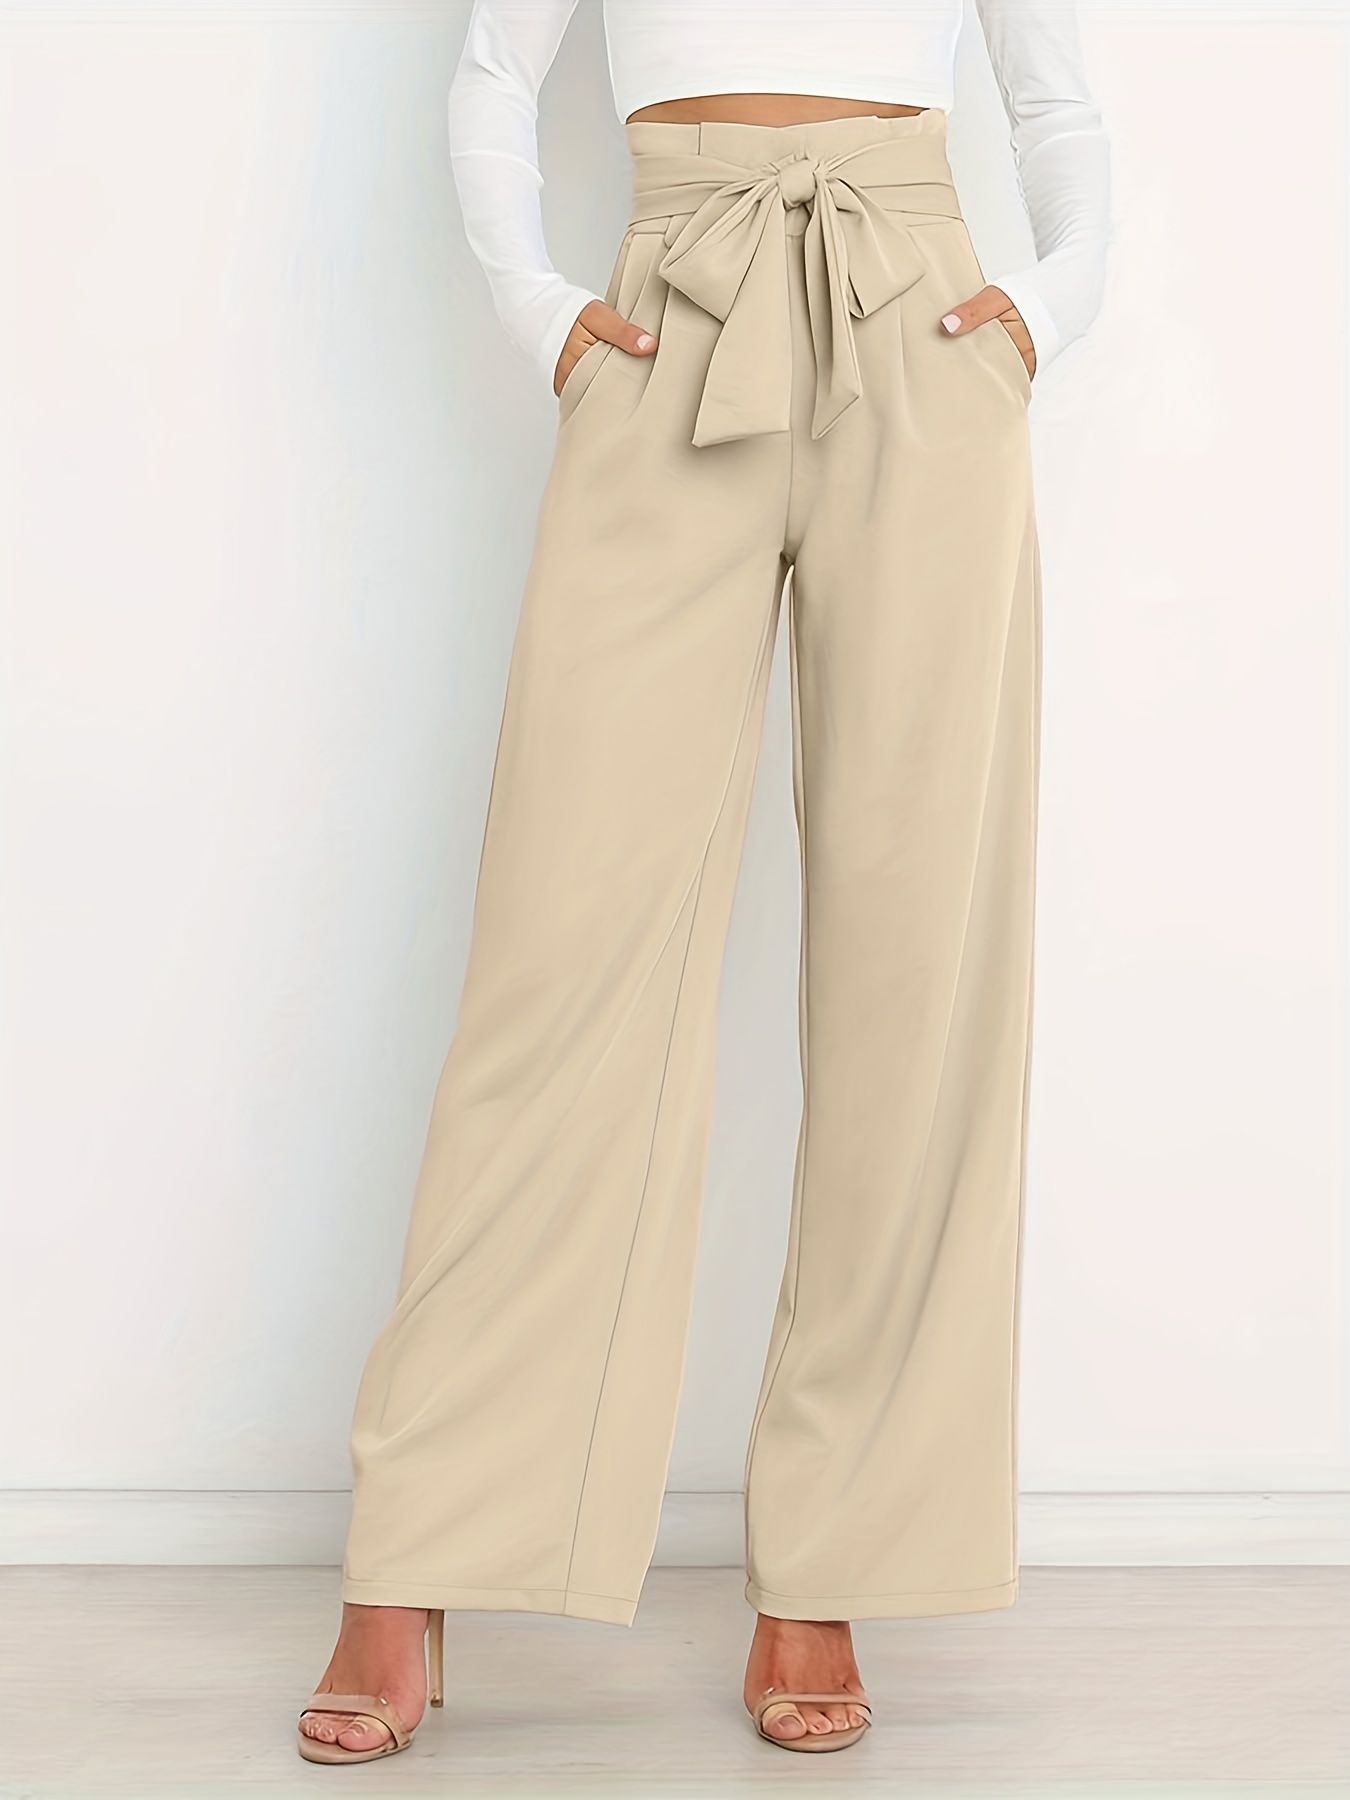 Extremely High Waisted Pants - Neatorama